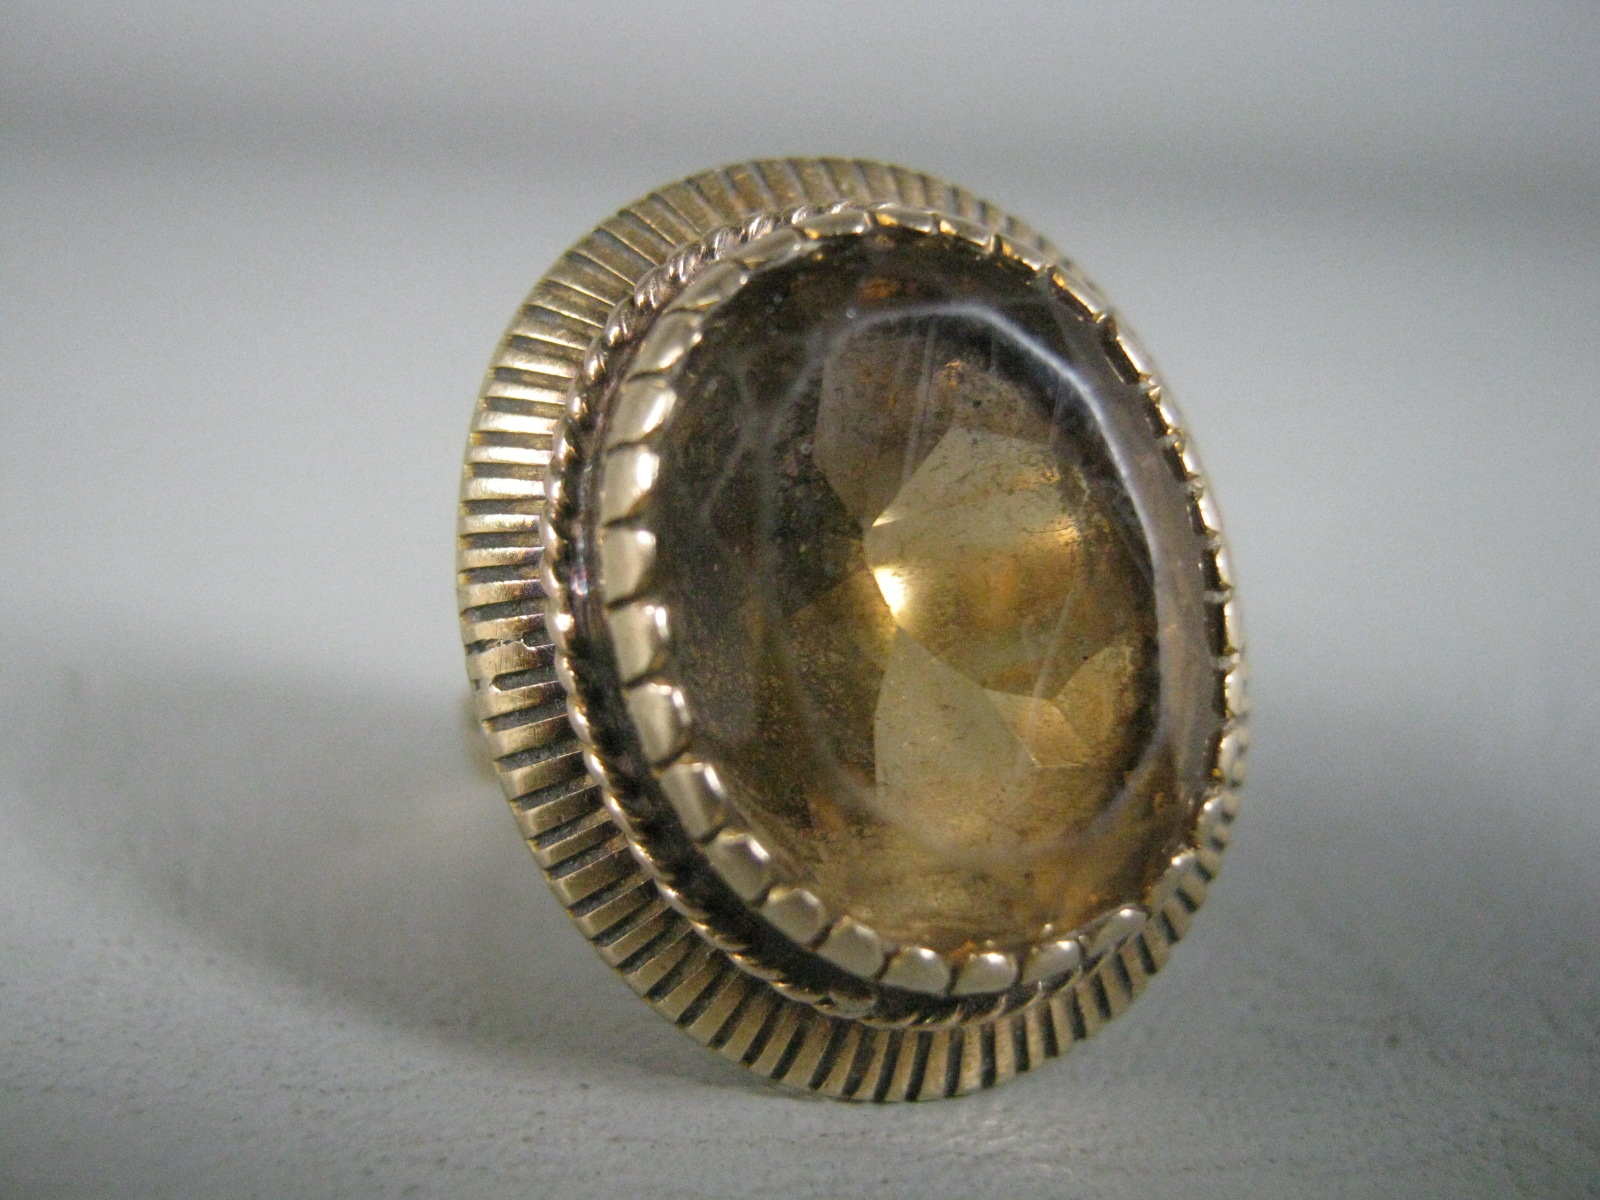 Vintage Antique 14K Yellow Gold Ring w/Oval Topaz Gemstone 10.2 Grams Size 8 NR! 4